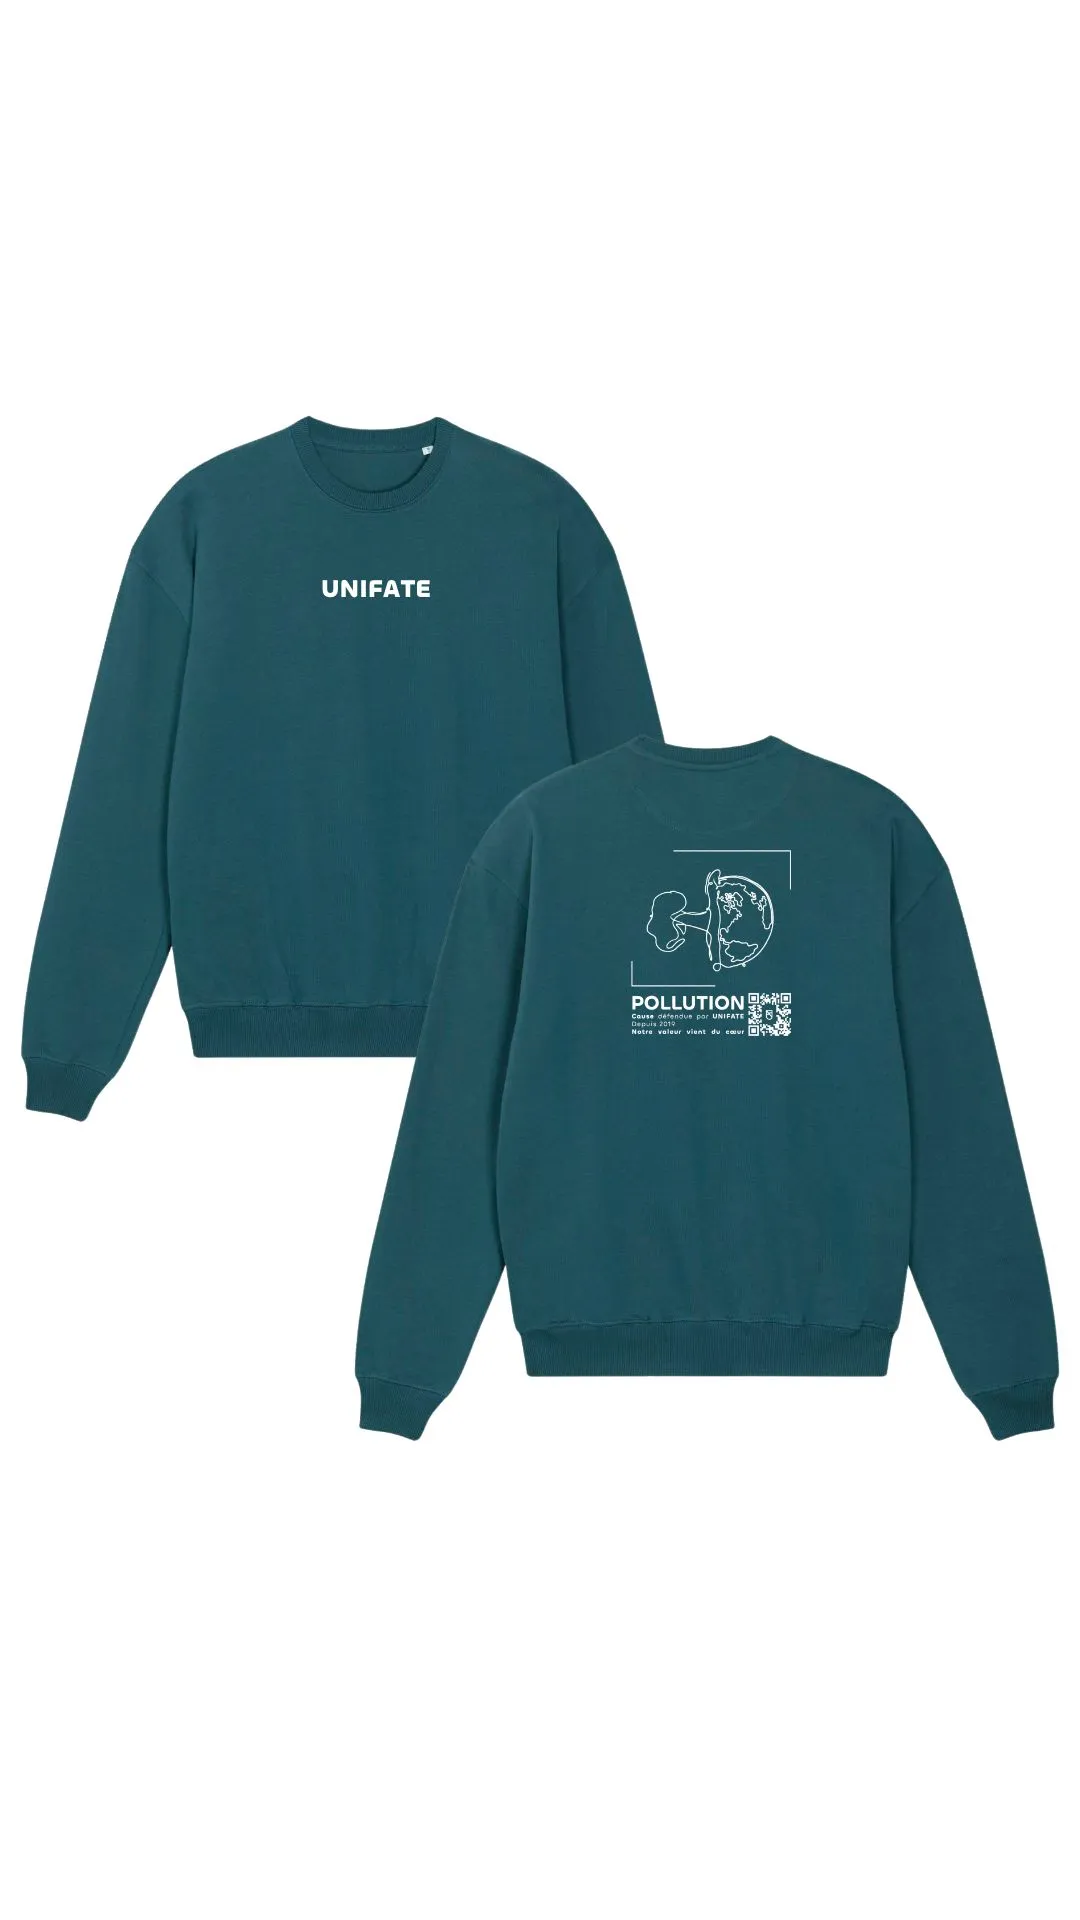 unifate-marque-responsable-rennes-collection-pollution-ete-sweat-turquoise